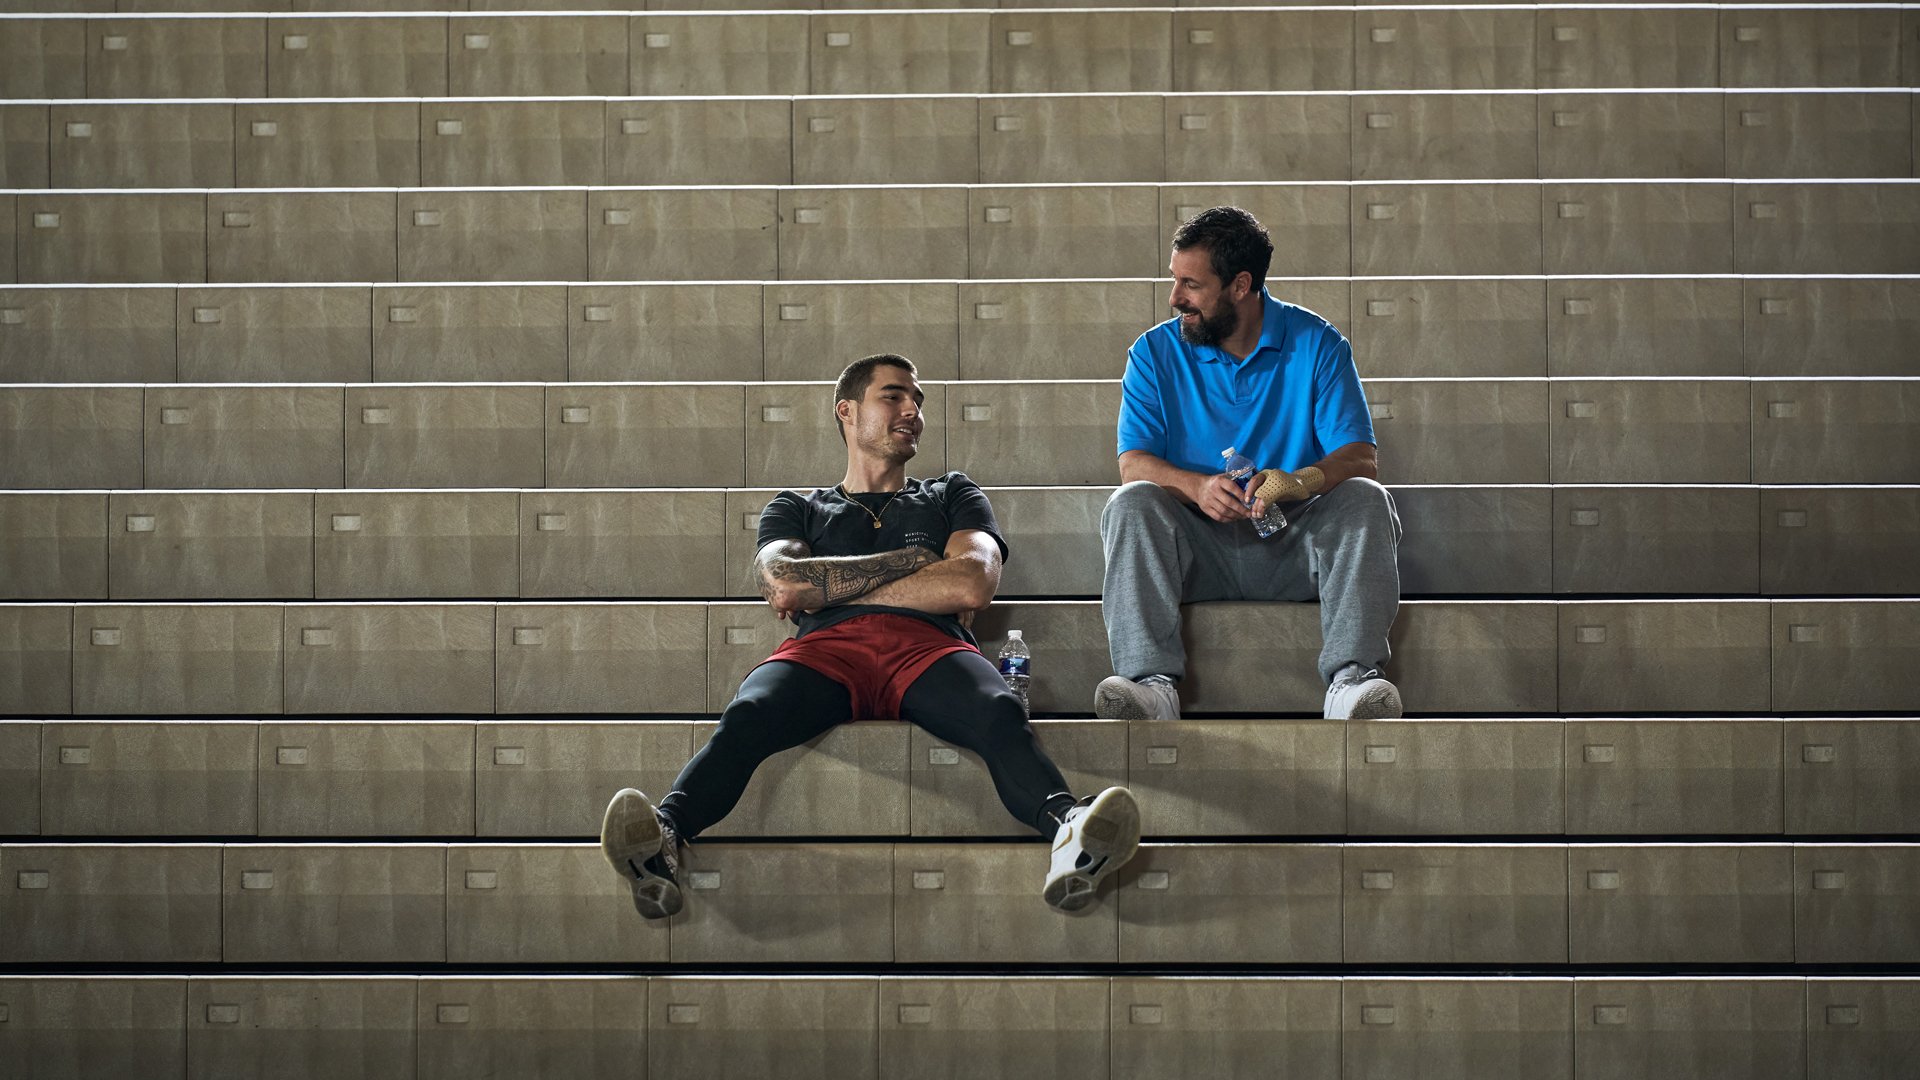 Two men sit in a basketball grandstand.